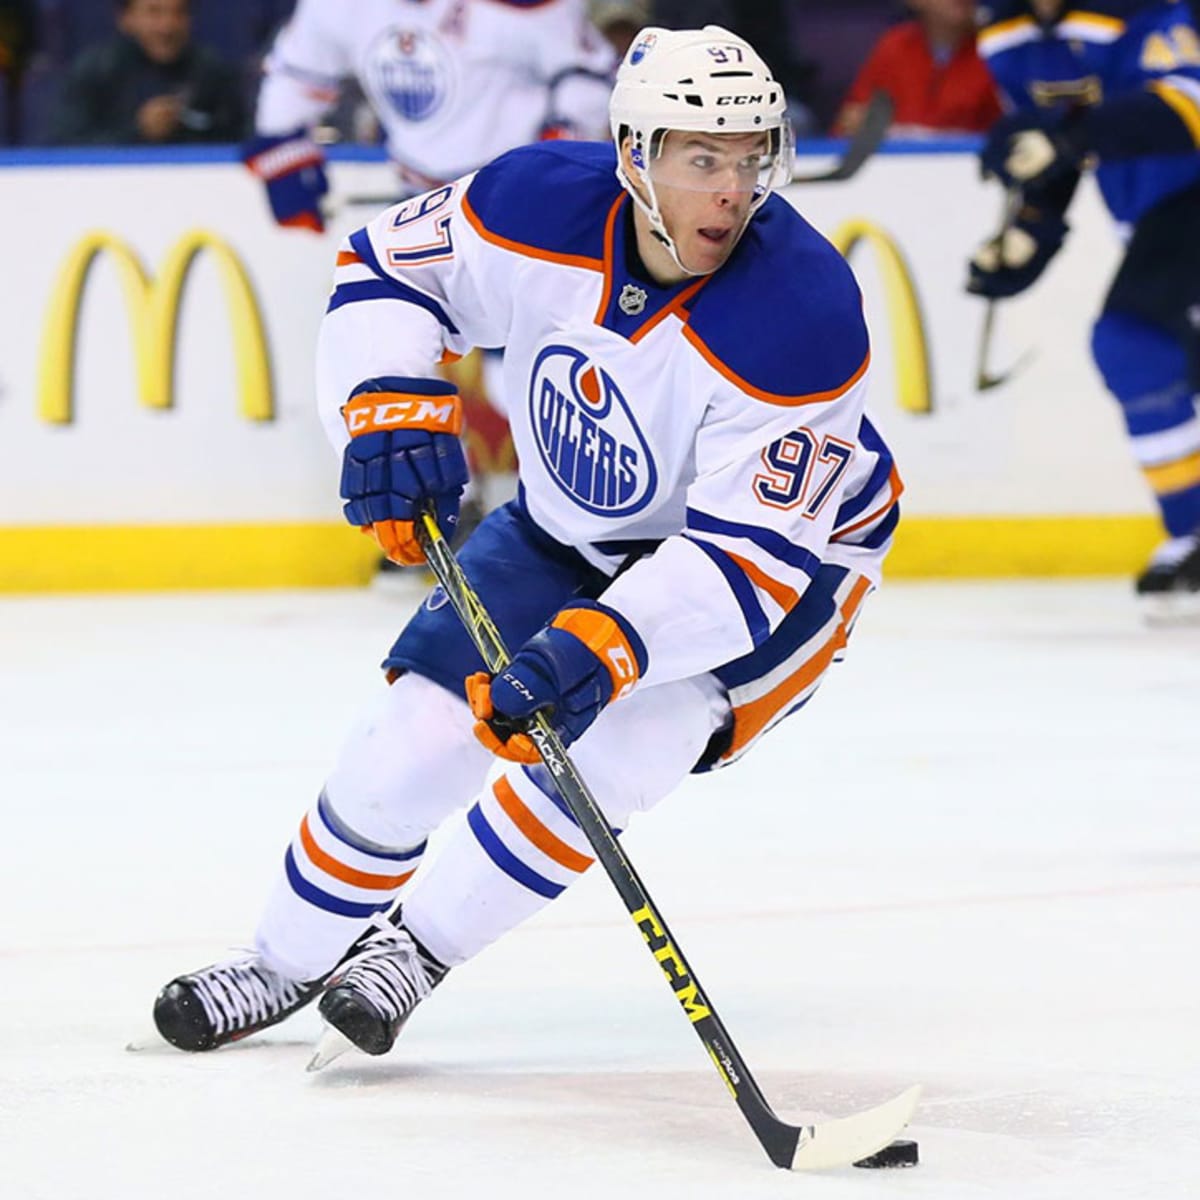 Hockey Daily 365 l NHL Highlights & News on X: Connor McDavid goes coast  to coast, carving past three Kings defenders before sniping home a beauty  to bring the Oilers back within one! What a goal! #GoKingsGo 2 - 1  #LetsGoOilers (Game 1)